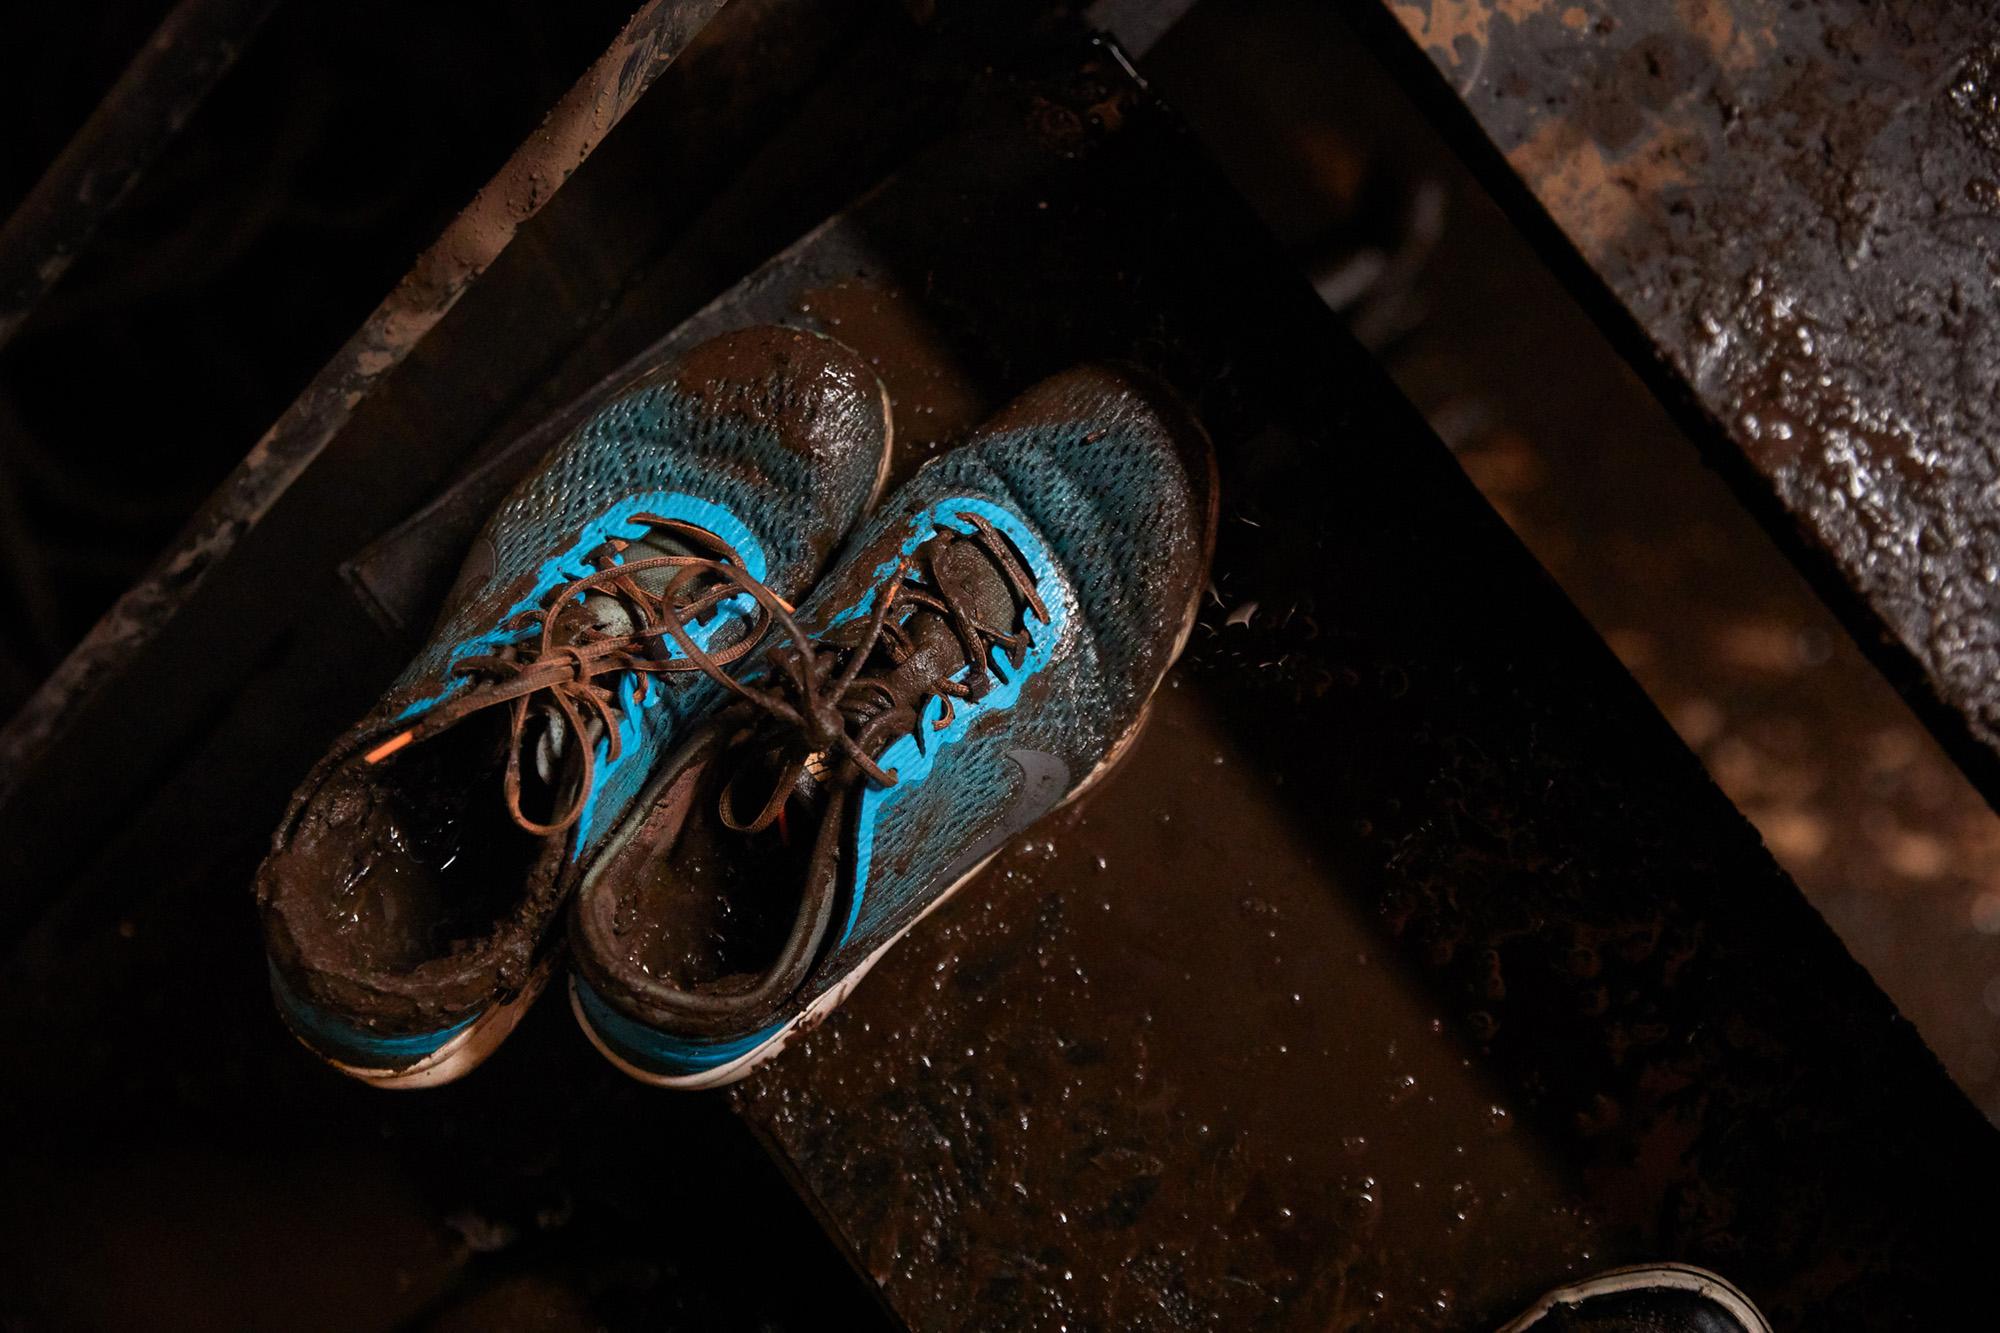 Detail of muddy shoes after a mudslide in Quito, Ecuador, Tuesday, Feb. 1, 2022.